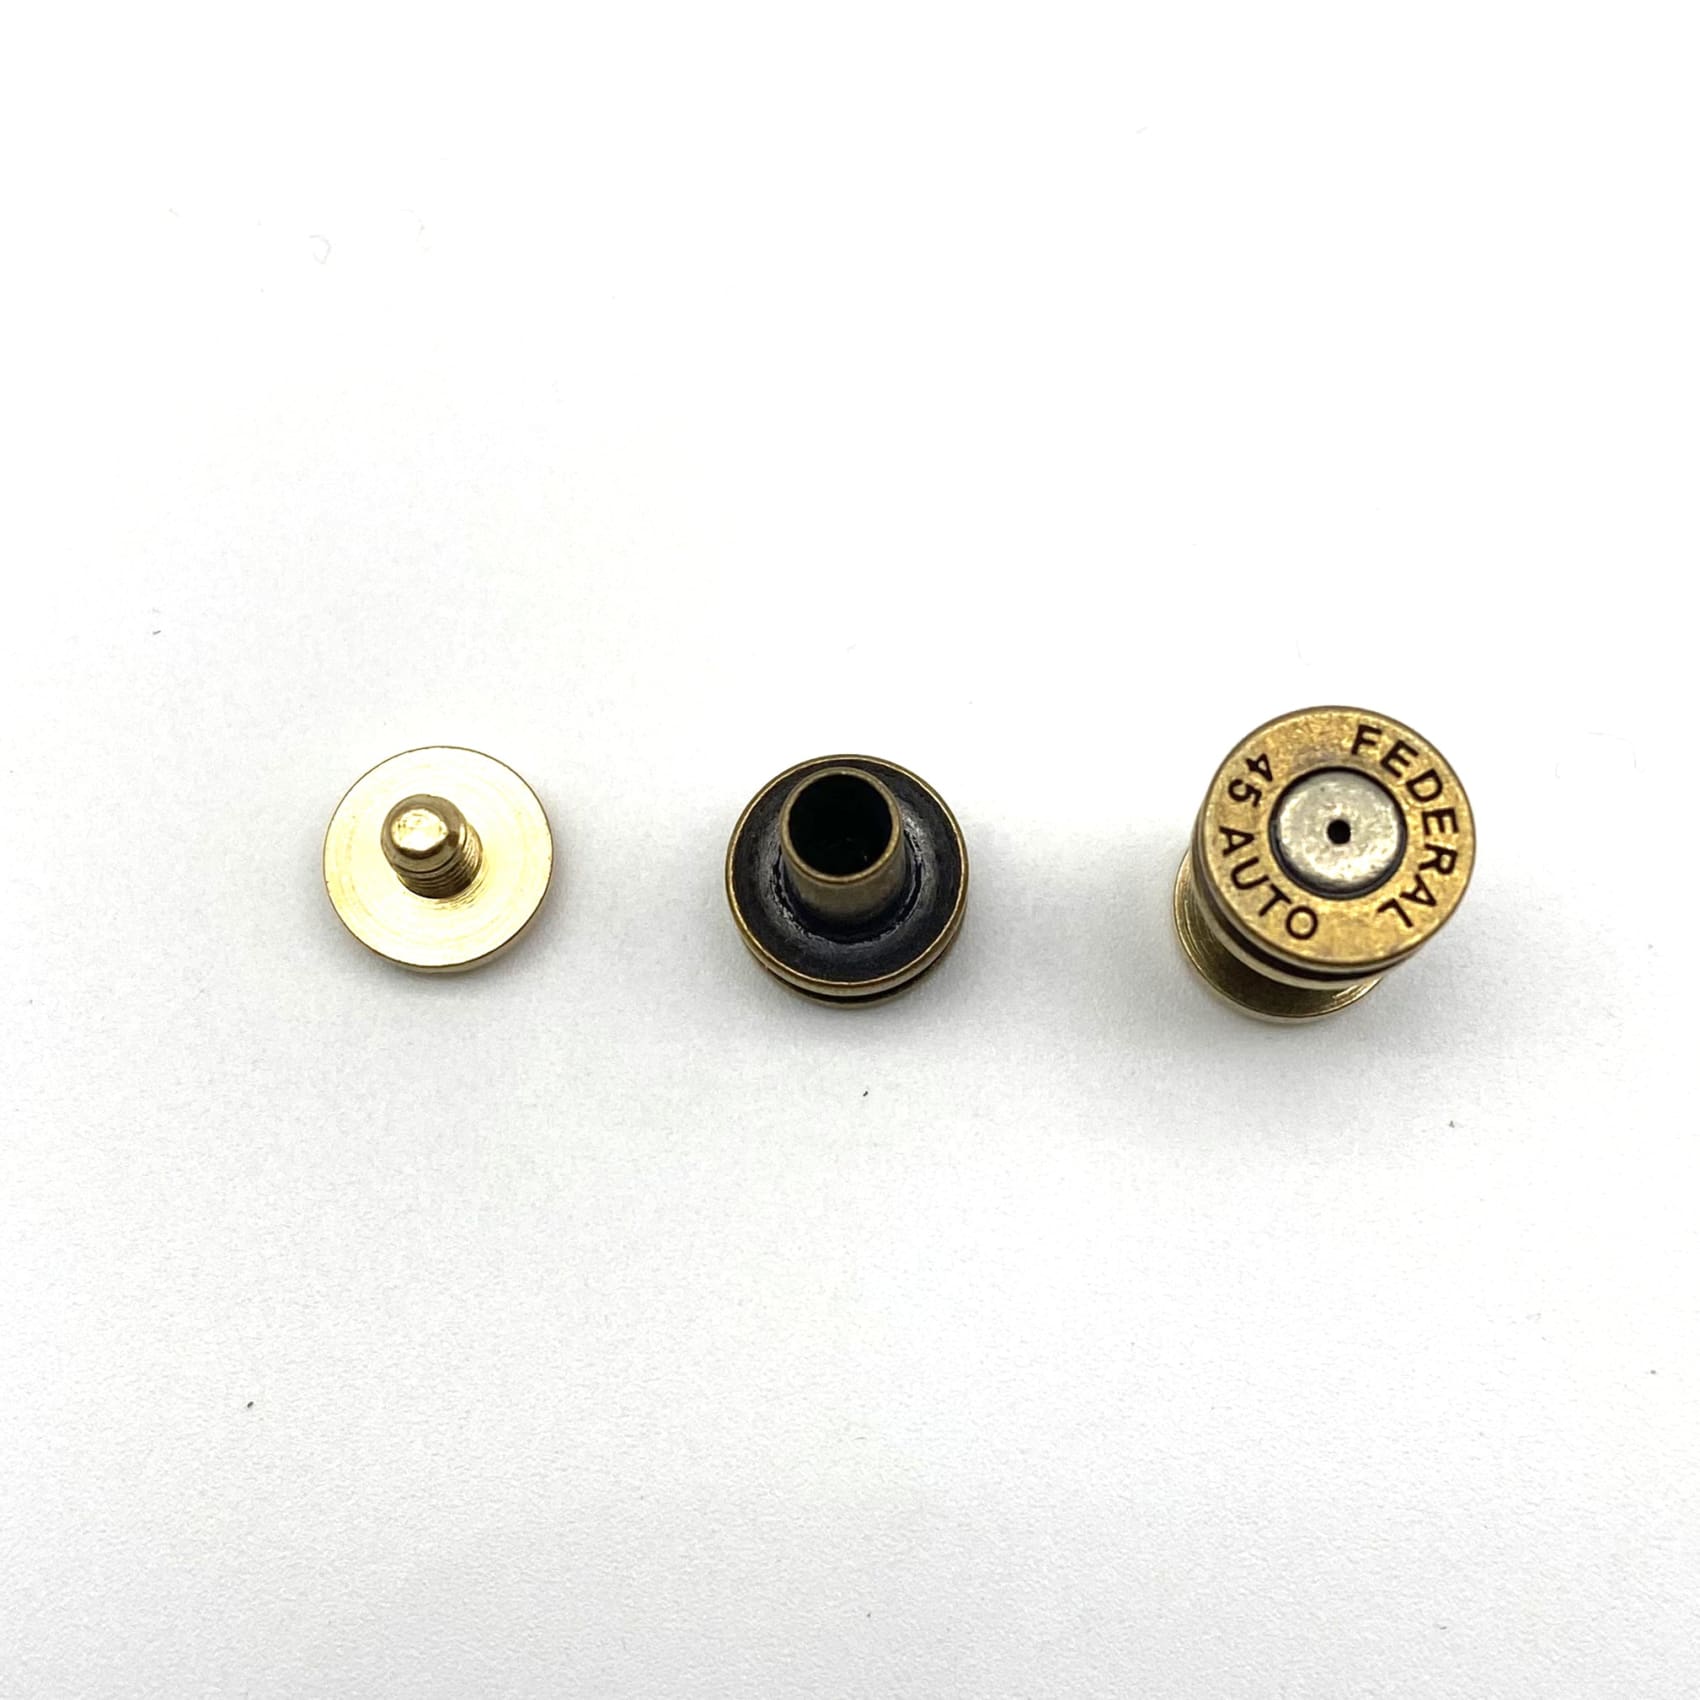 Chicago Screw Rivets with O-Ring, Metal Field Shop